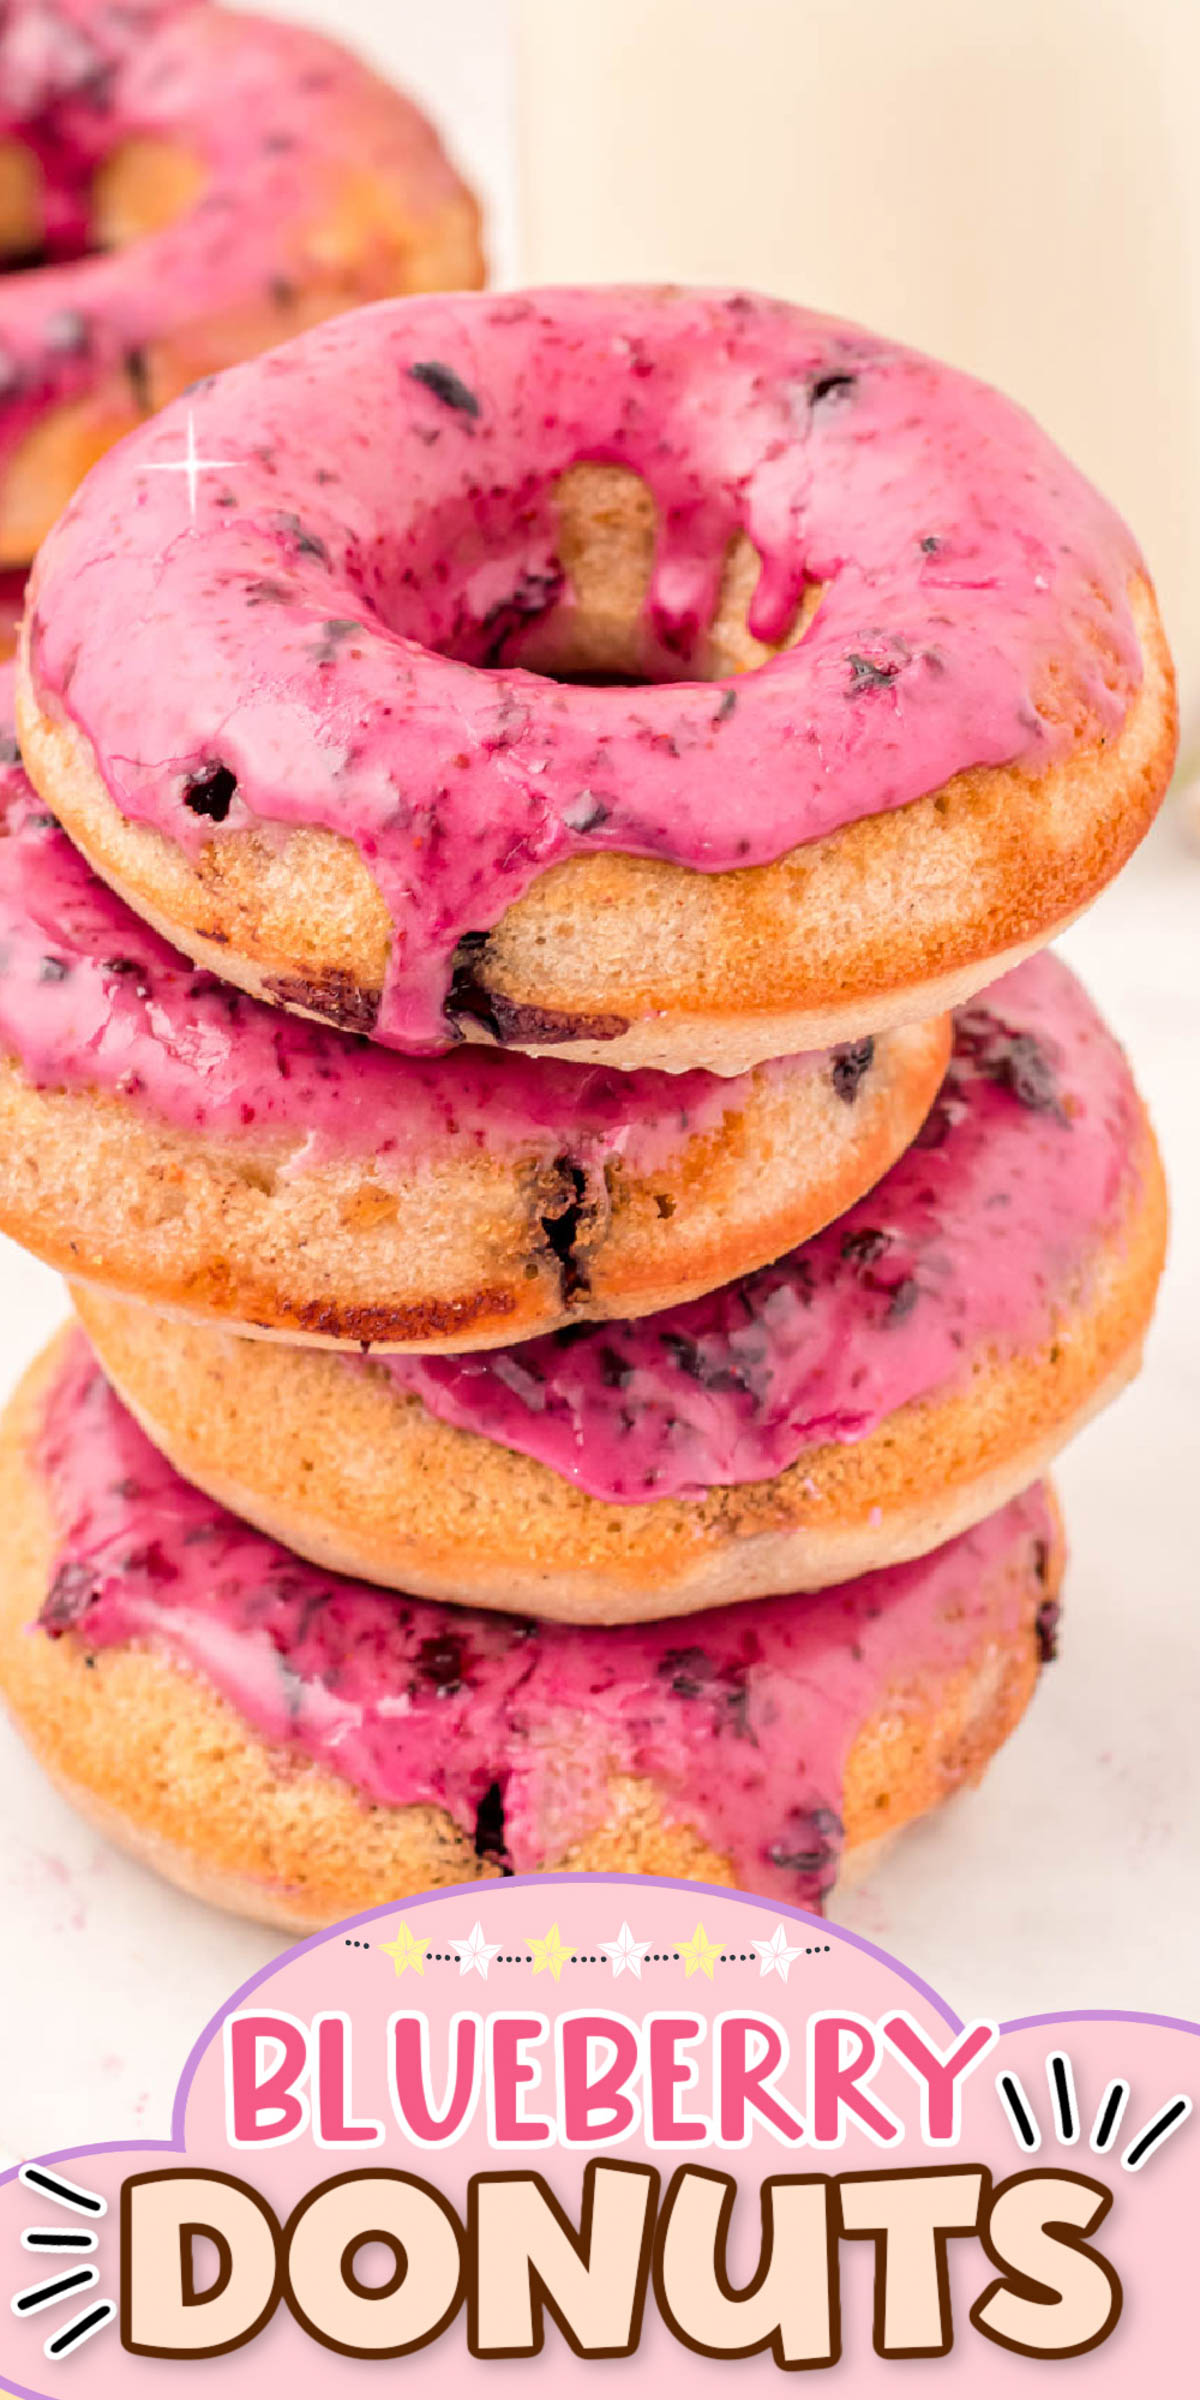 Baked Blueberry Donuts is an easy homemade treat bursting with juicy sweet blueberries and topped with delicious blueberry icing and ready in just 30 minutes! via @sugarandsoulco